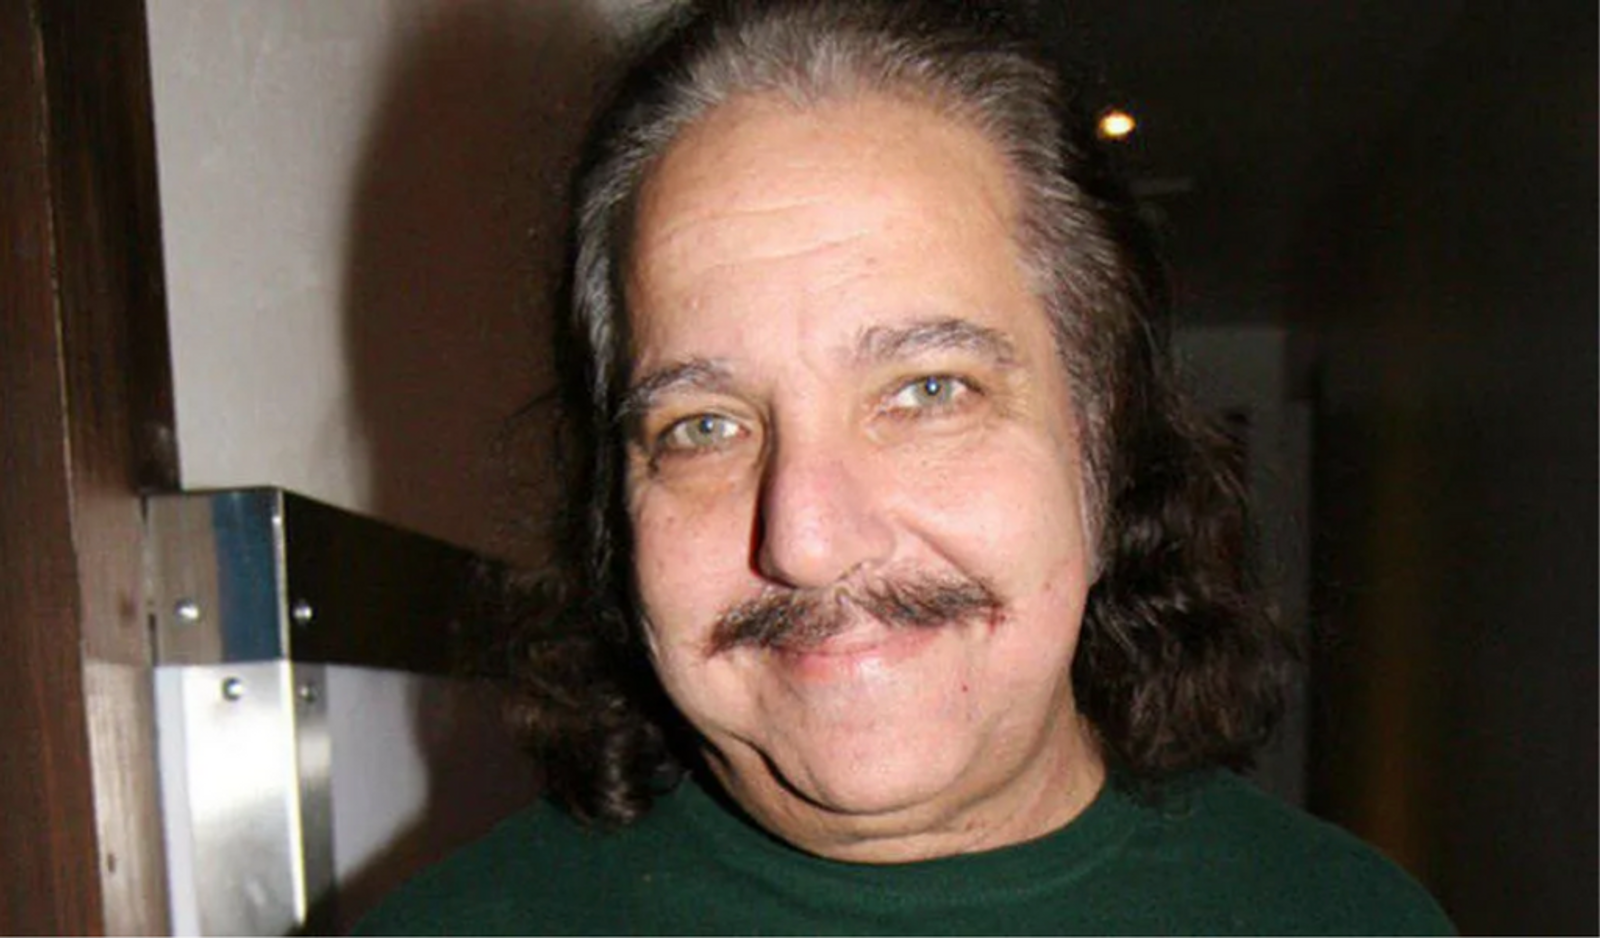 Ron Jeremy Sexual Assault Case Delayed Again Until End of March